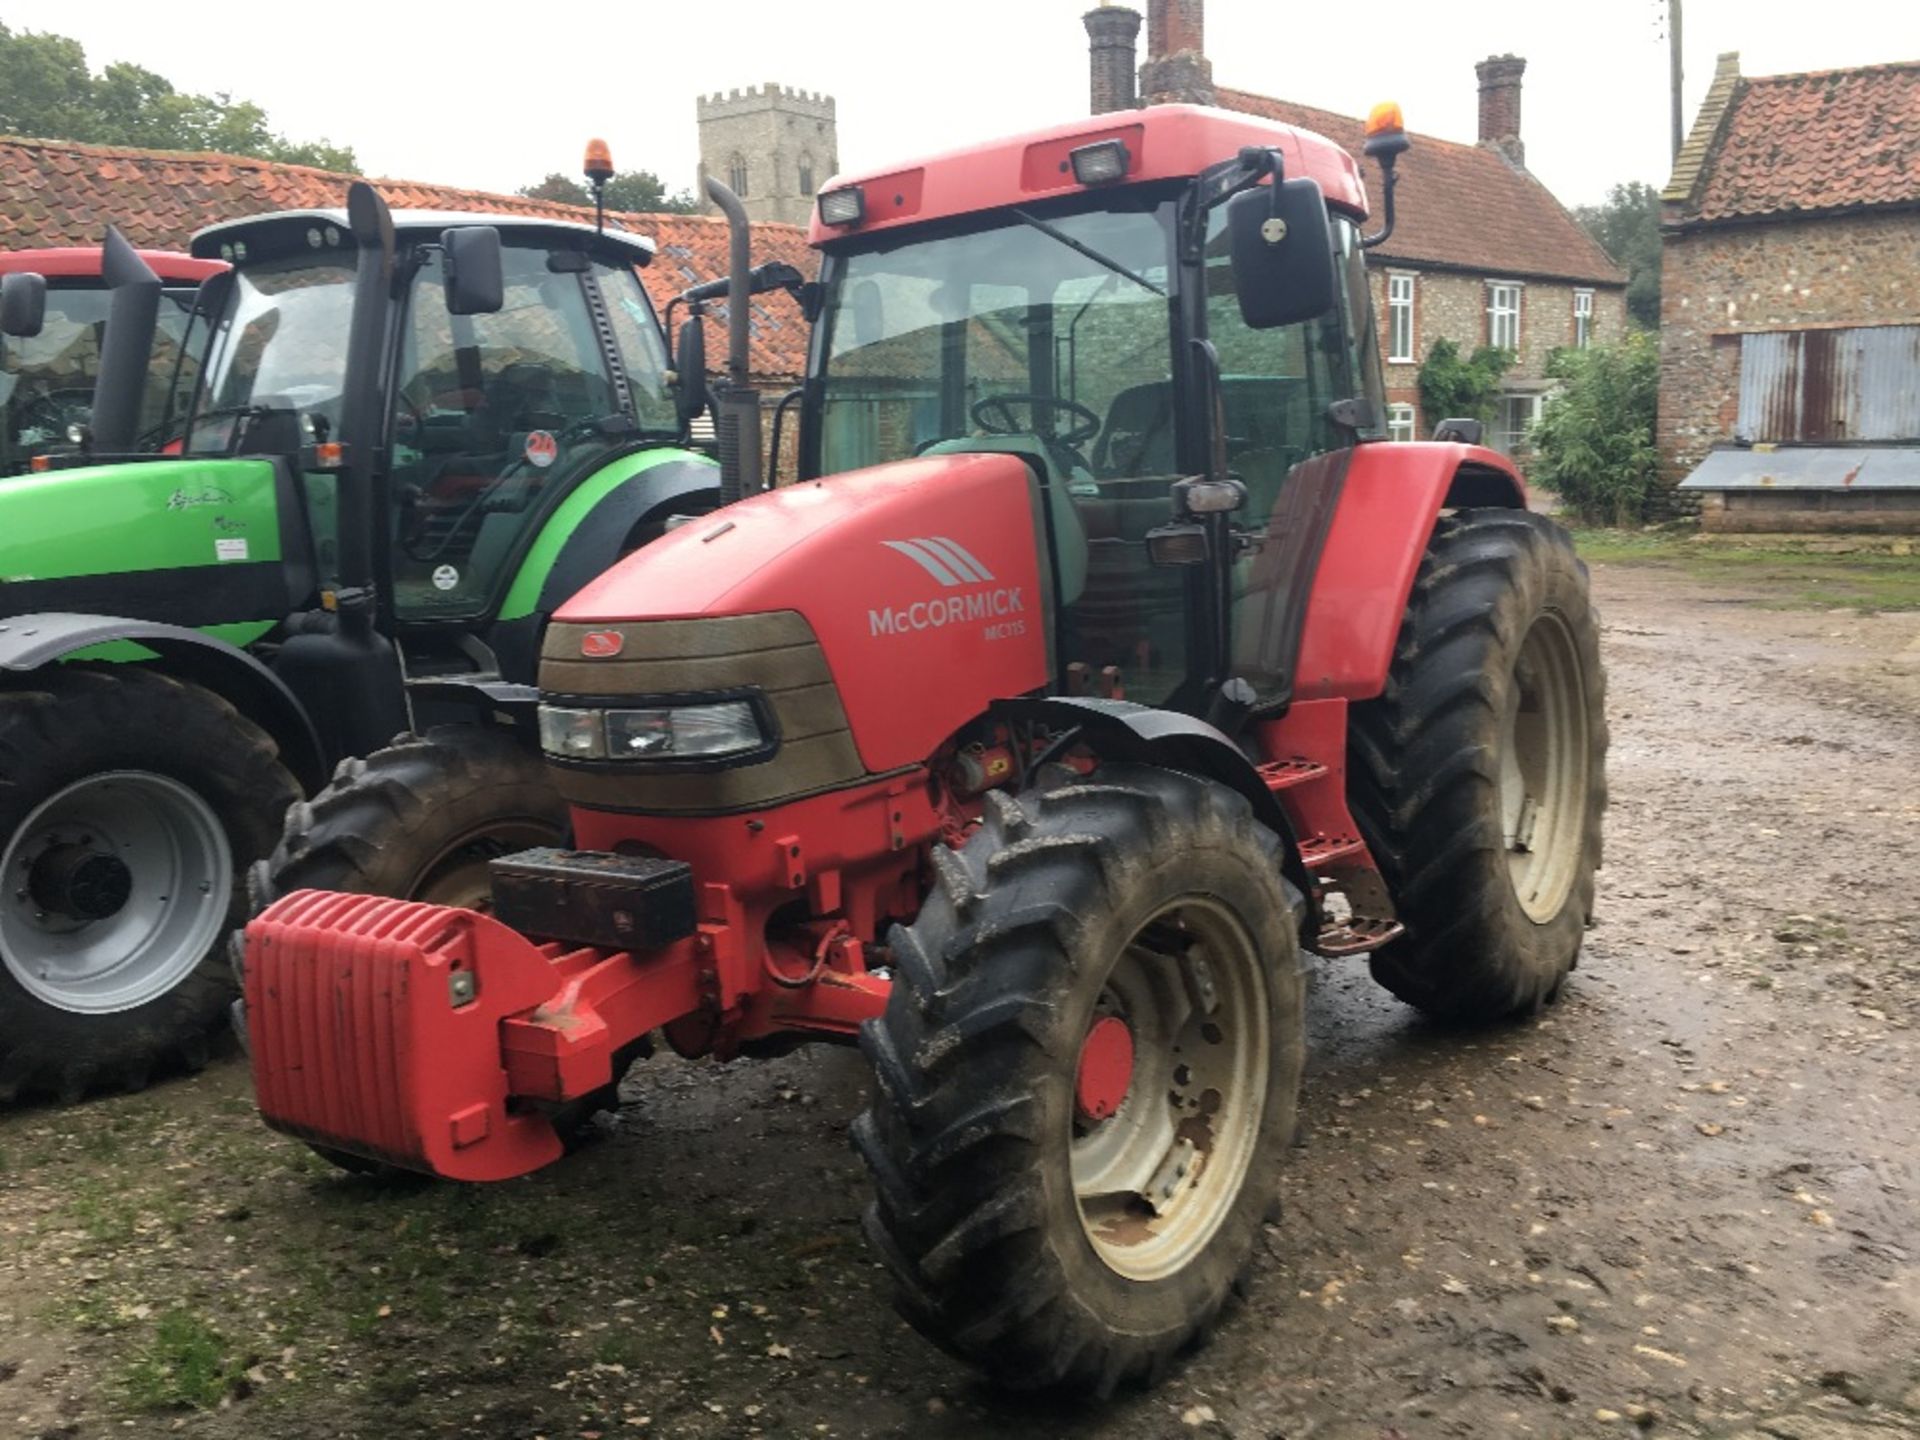 2003 McCormick MC115 tractor, front wafer weights, Rear Tyres: 12.4 R46, Front Tyres: 270/95 R32.